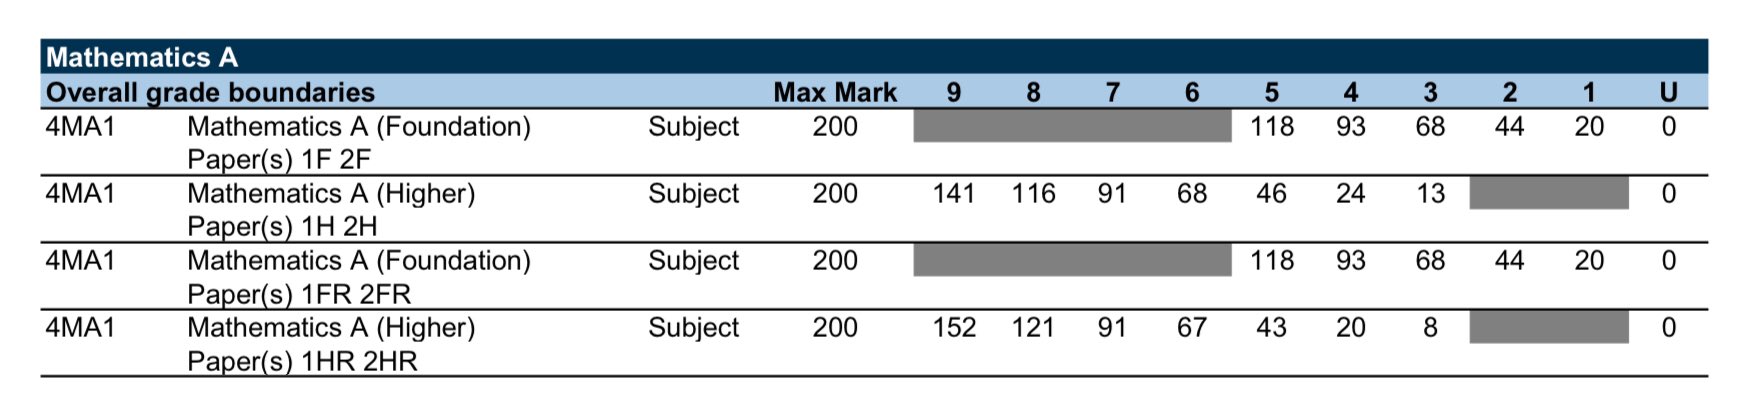 Graham Cumming on X: Only 12% required for a pass (Grade 4) on the Higher  tier International GCSE Mathematics exam in November 2020 - I'd wager you  didn't need to know a